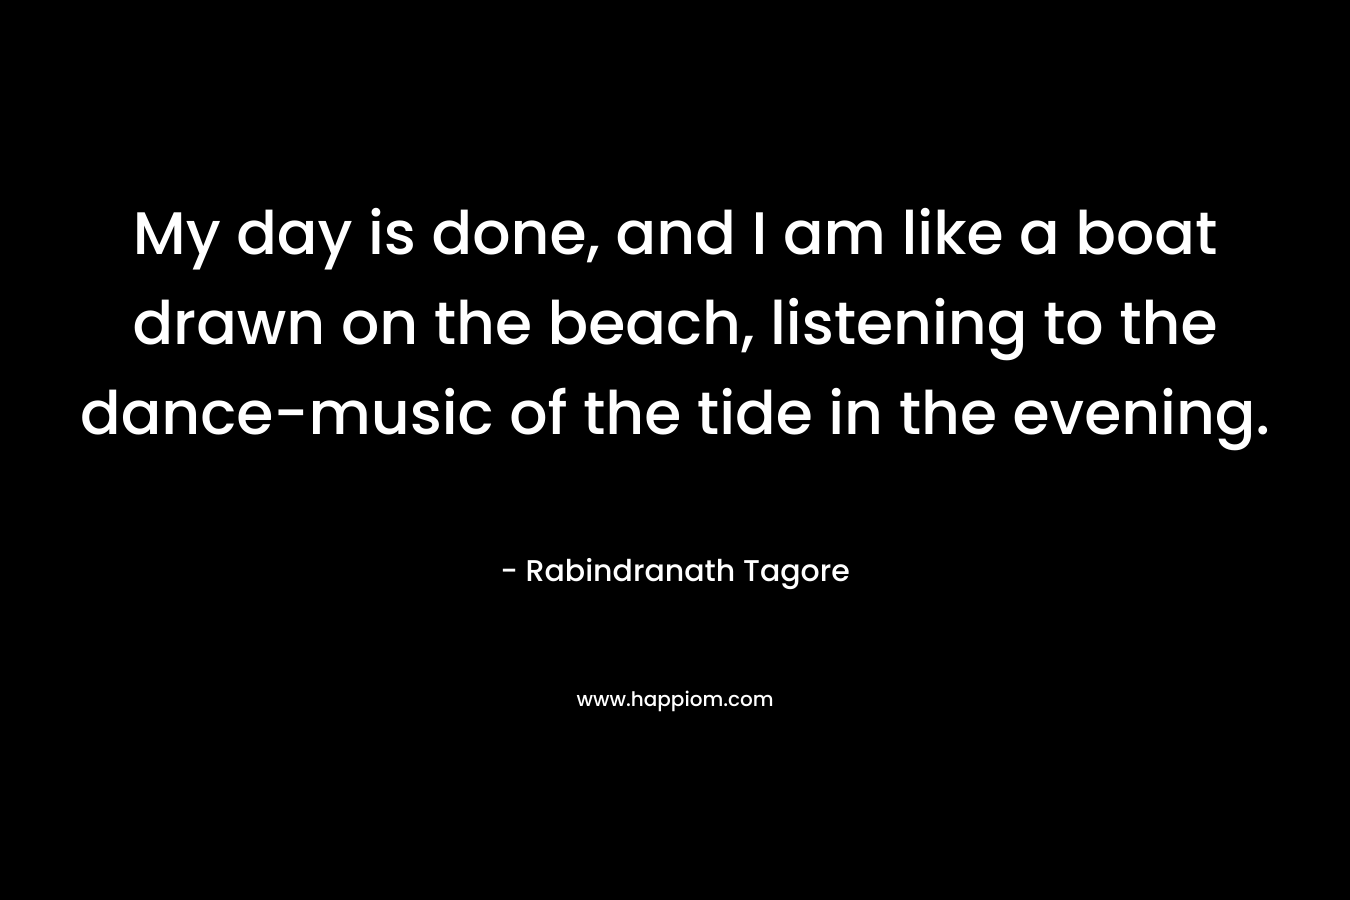 My day is done, and I am like a boat drawn on the beach, listening to the dance-music of the tide in the evening. – Rabindranath Tagore